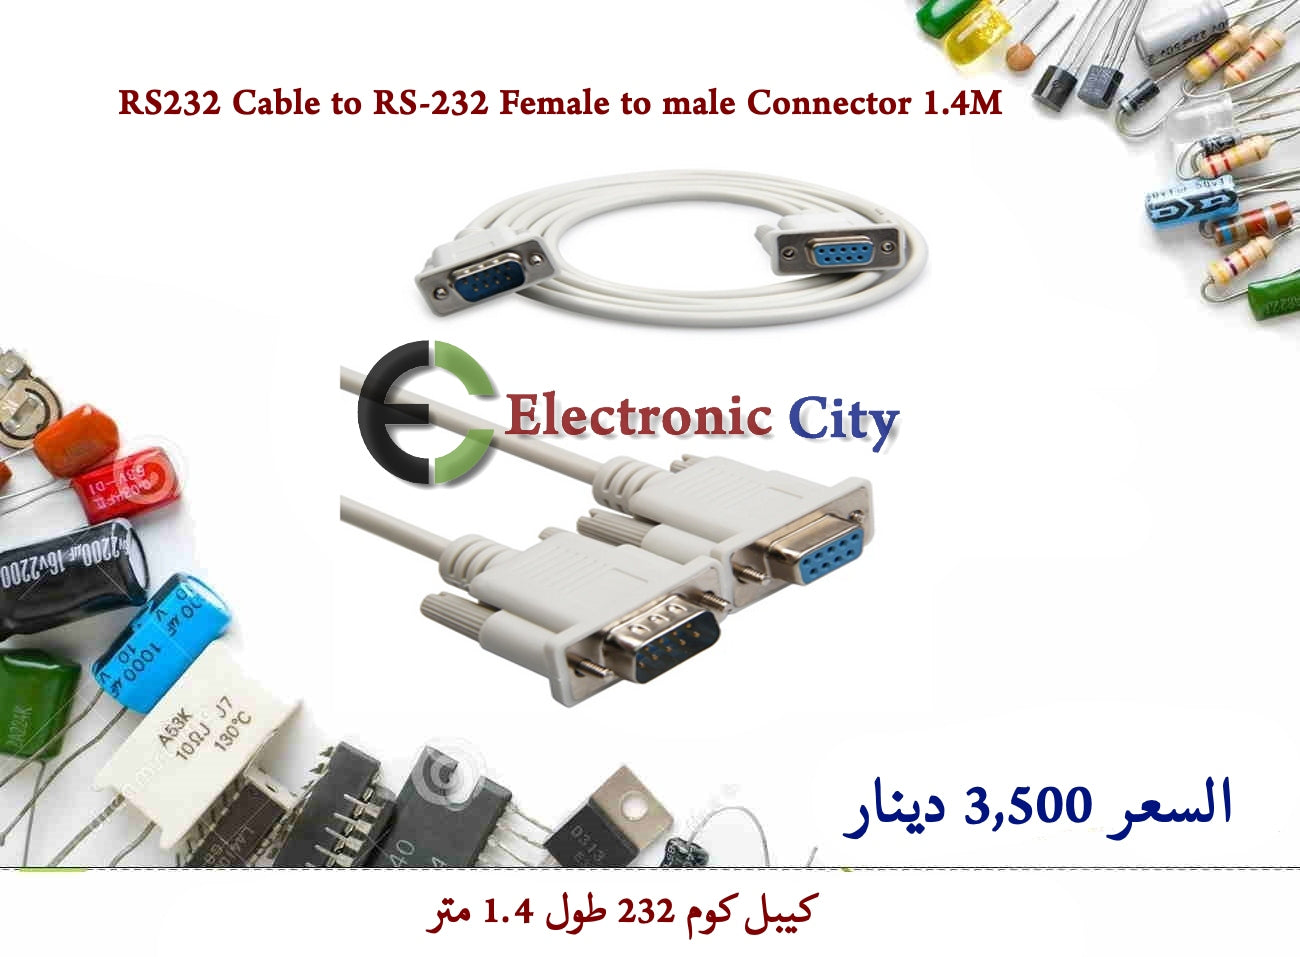 RS232 Cable to RS-232 Female to male Connector 1.4M